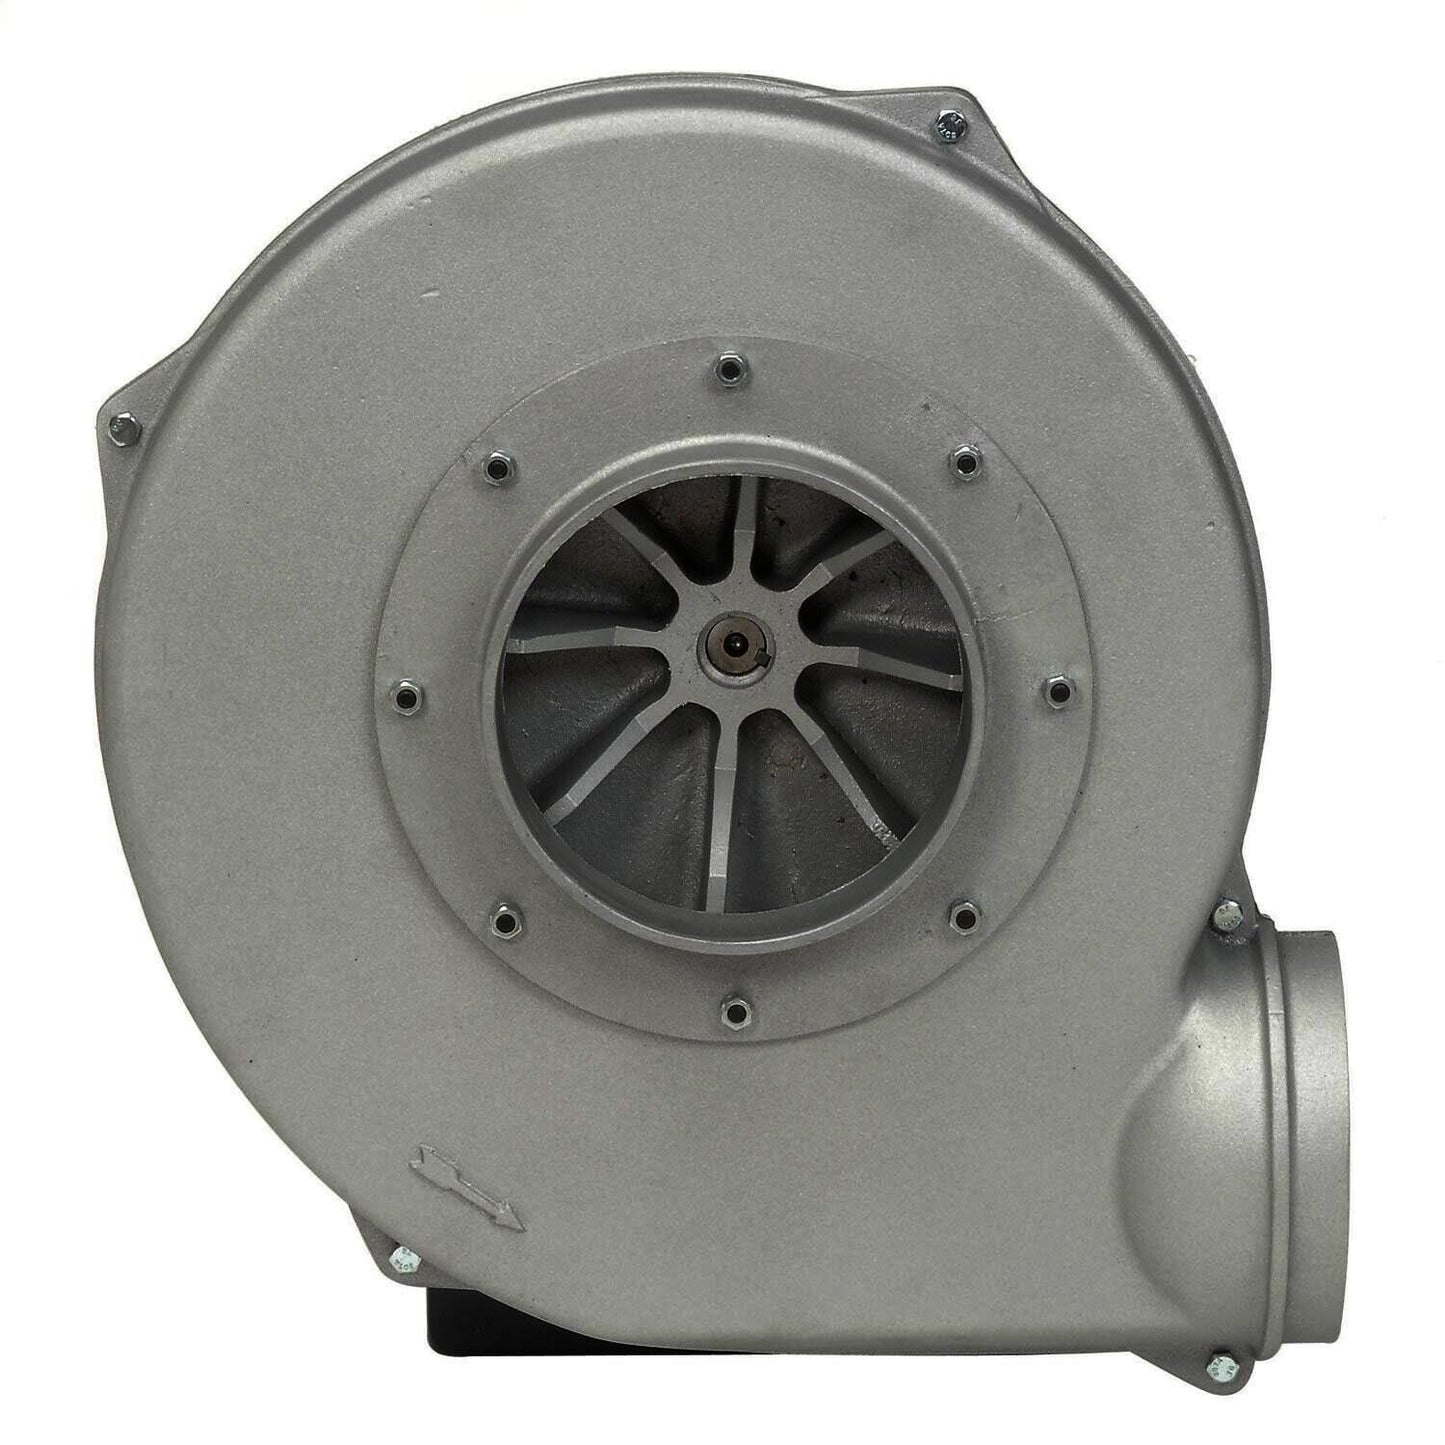 ALUMINUM BLOWER - 1575 CFM - 230/460V - 3 PH - 3 Hp - 8" In / 6" Out - TEFC - BH